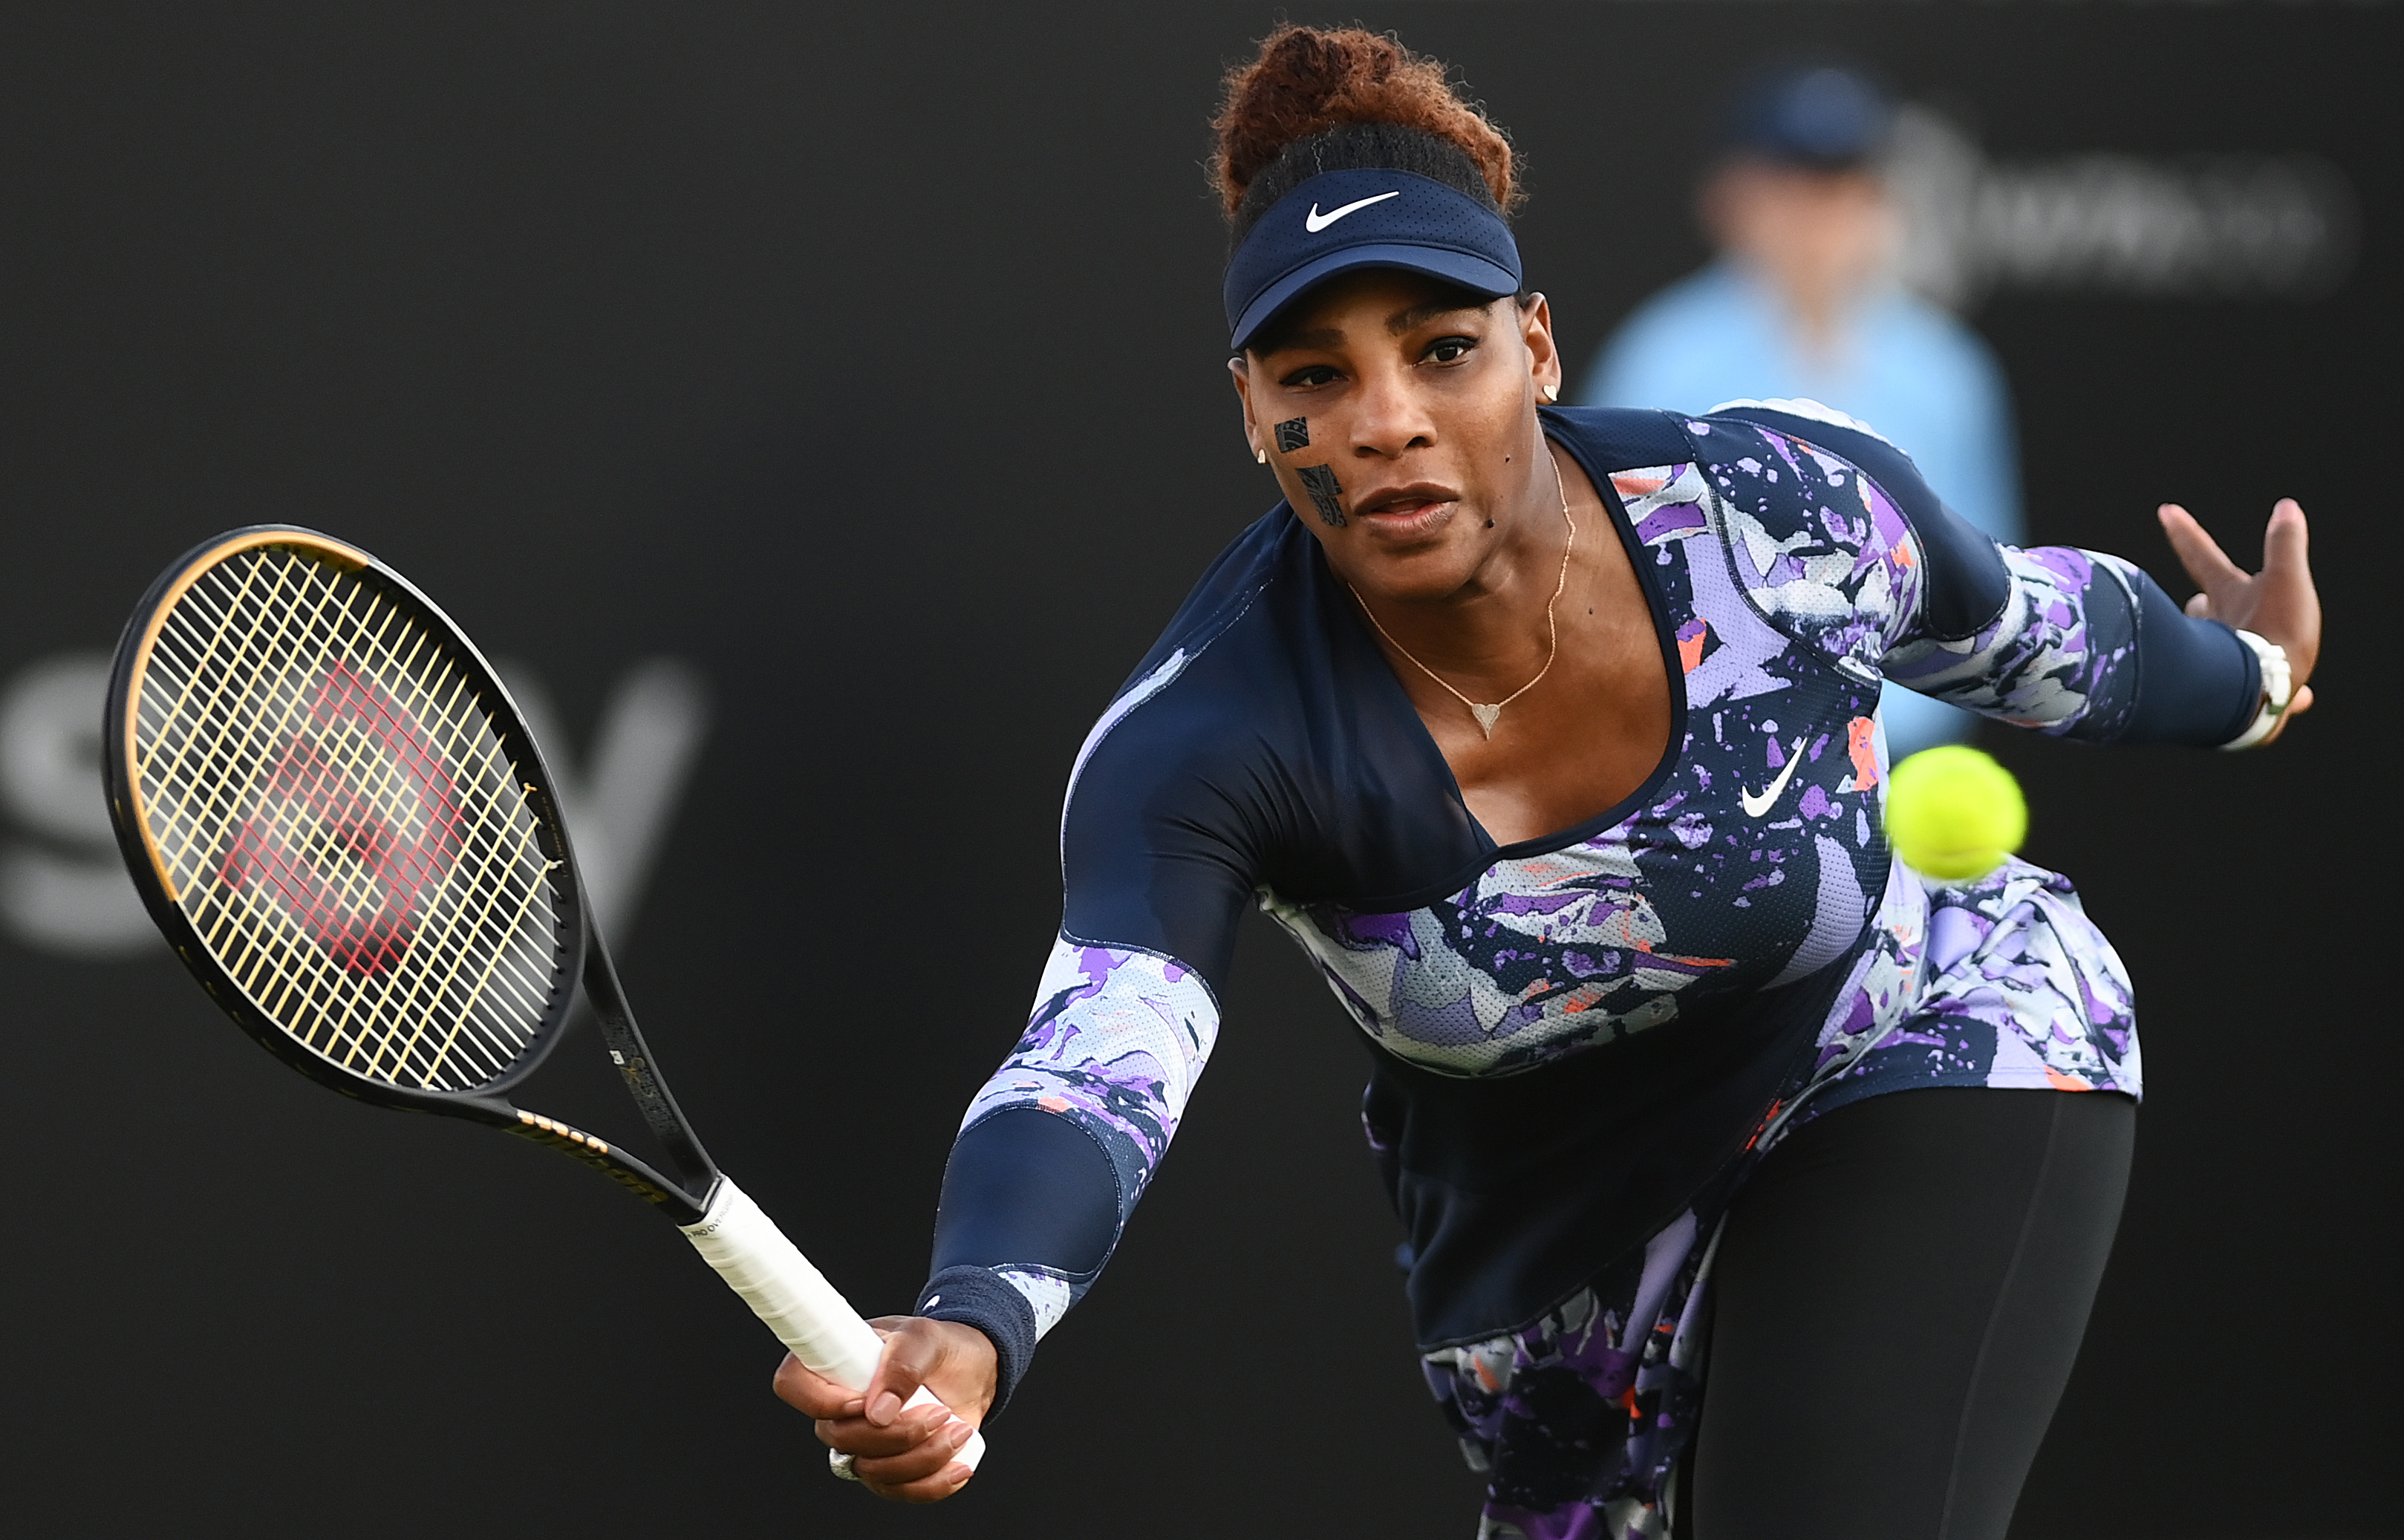 Serena Williams of United States of America plays a forehand during their Women's Doubles Round One match against Marie Bouzkova of Czech Republic and Sara Sorribes Tormo of Spain on Day 4 of the Rothesay International at Devonshire Park on June 21, 2022 in Eastbourne, England. (Photo by Mike Hewitt/Getty Images)